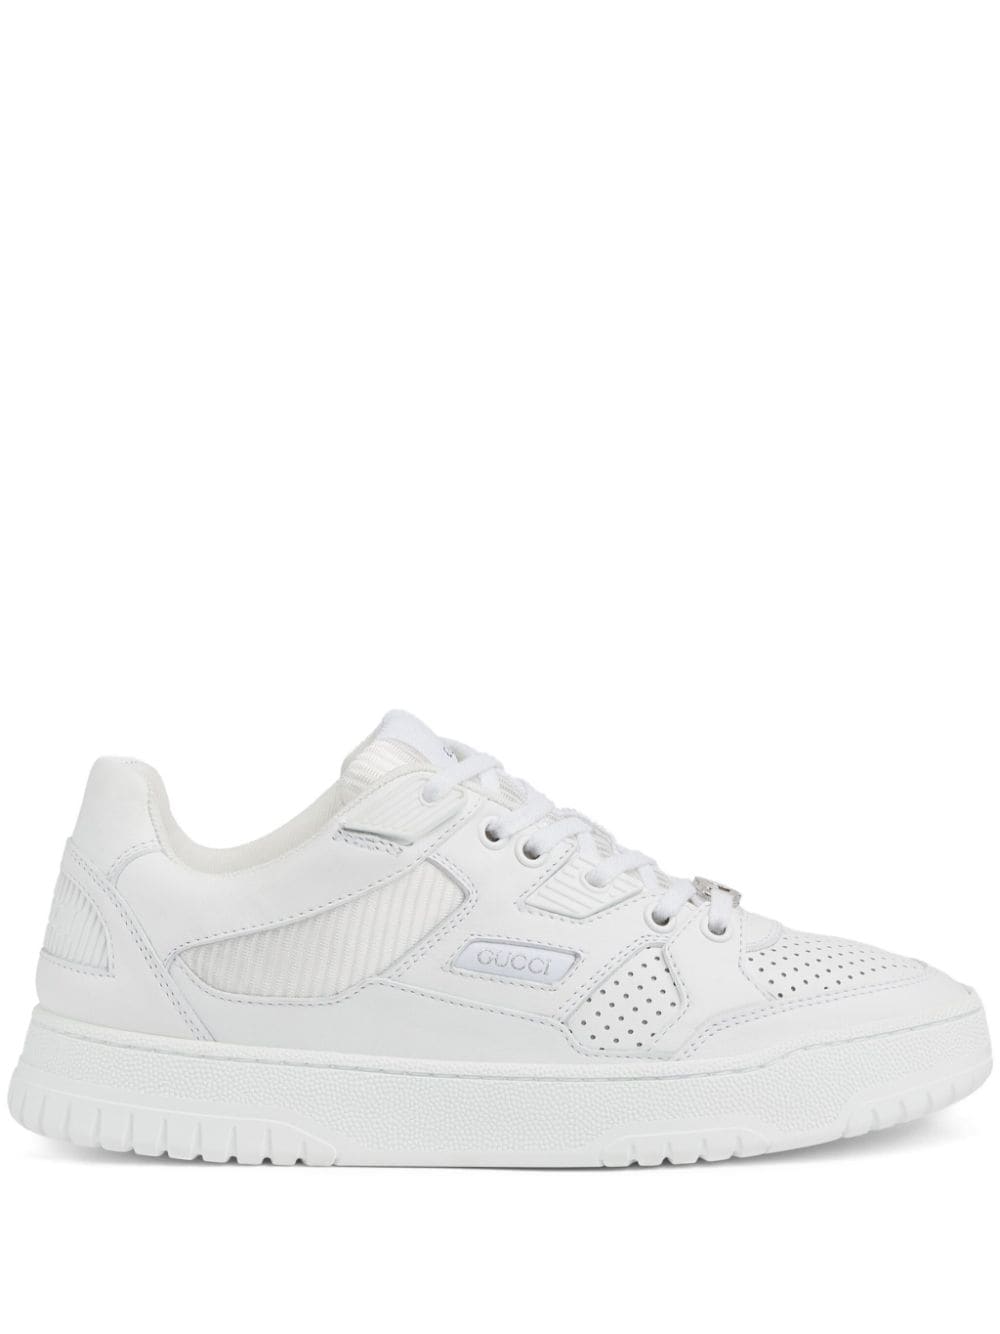 Gucci White Leather Sneakers With Perforated Details And Interlocking G Lace-up Closure